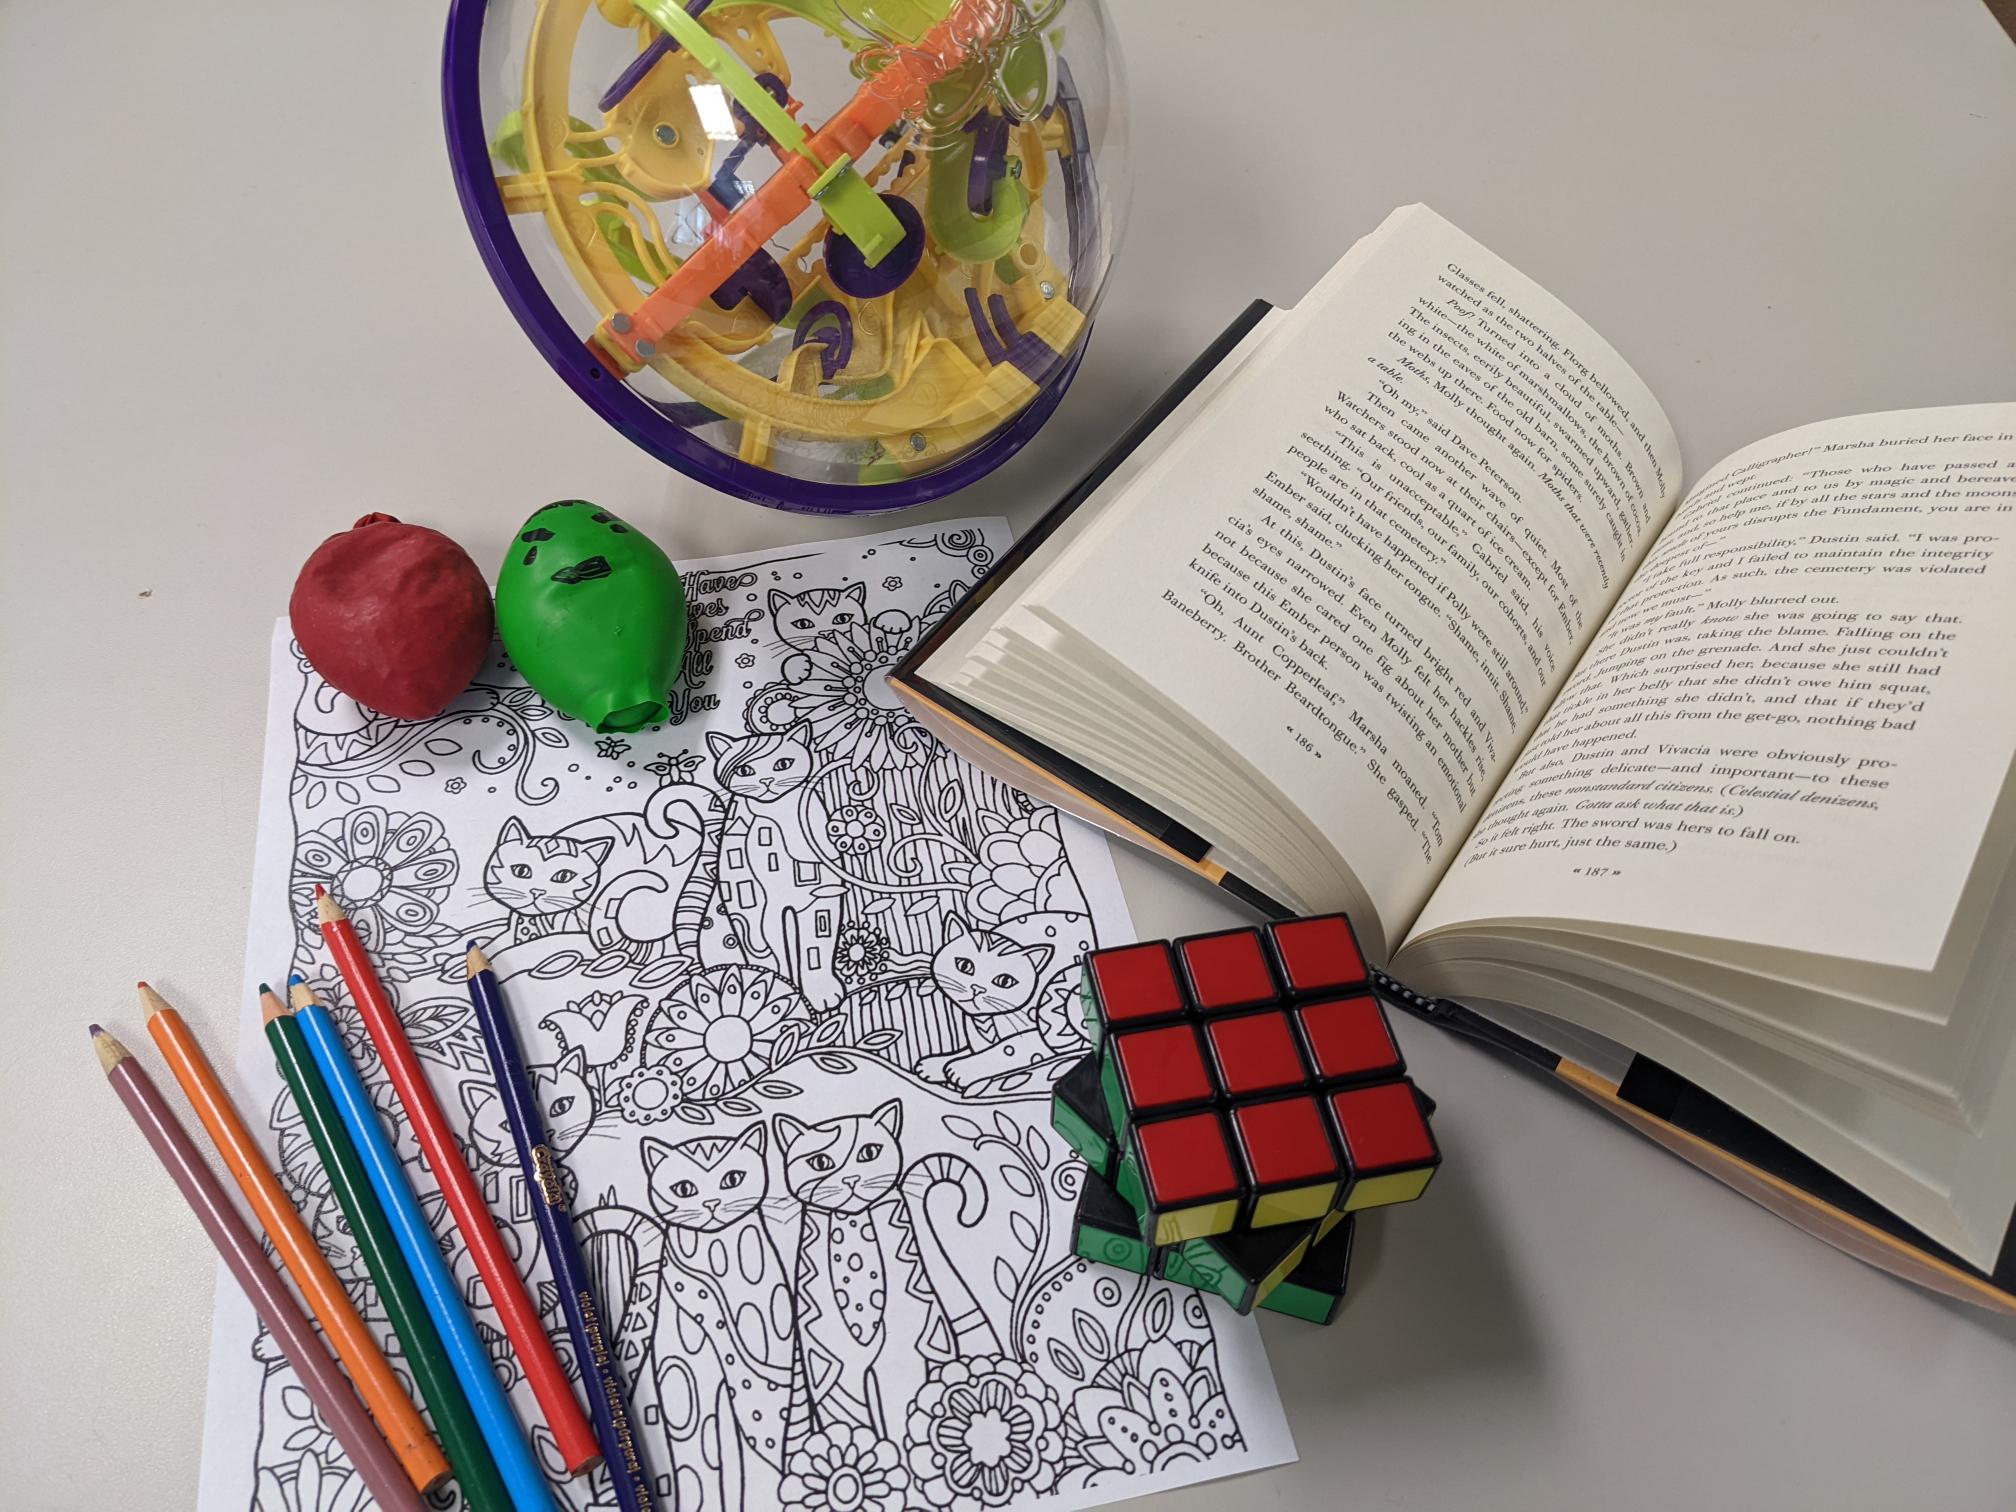 cat coloring sheet, color pencils, red and green stress ball, puzzle, Rubik's cube, and opened book